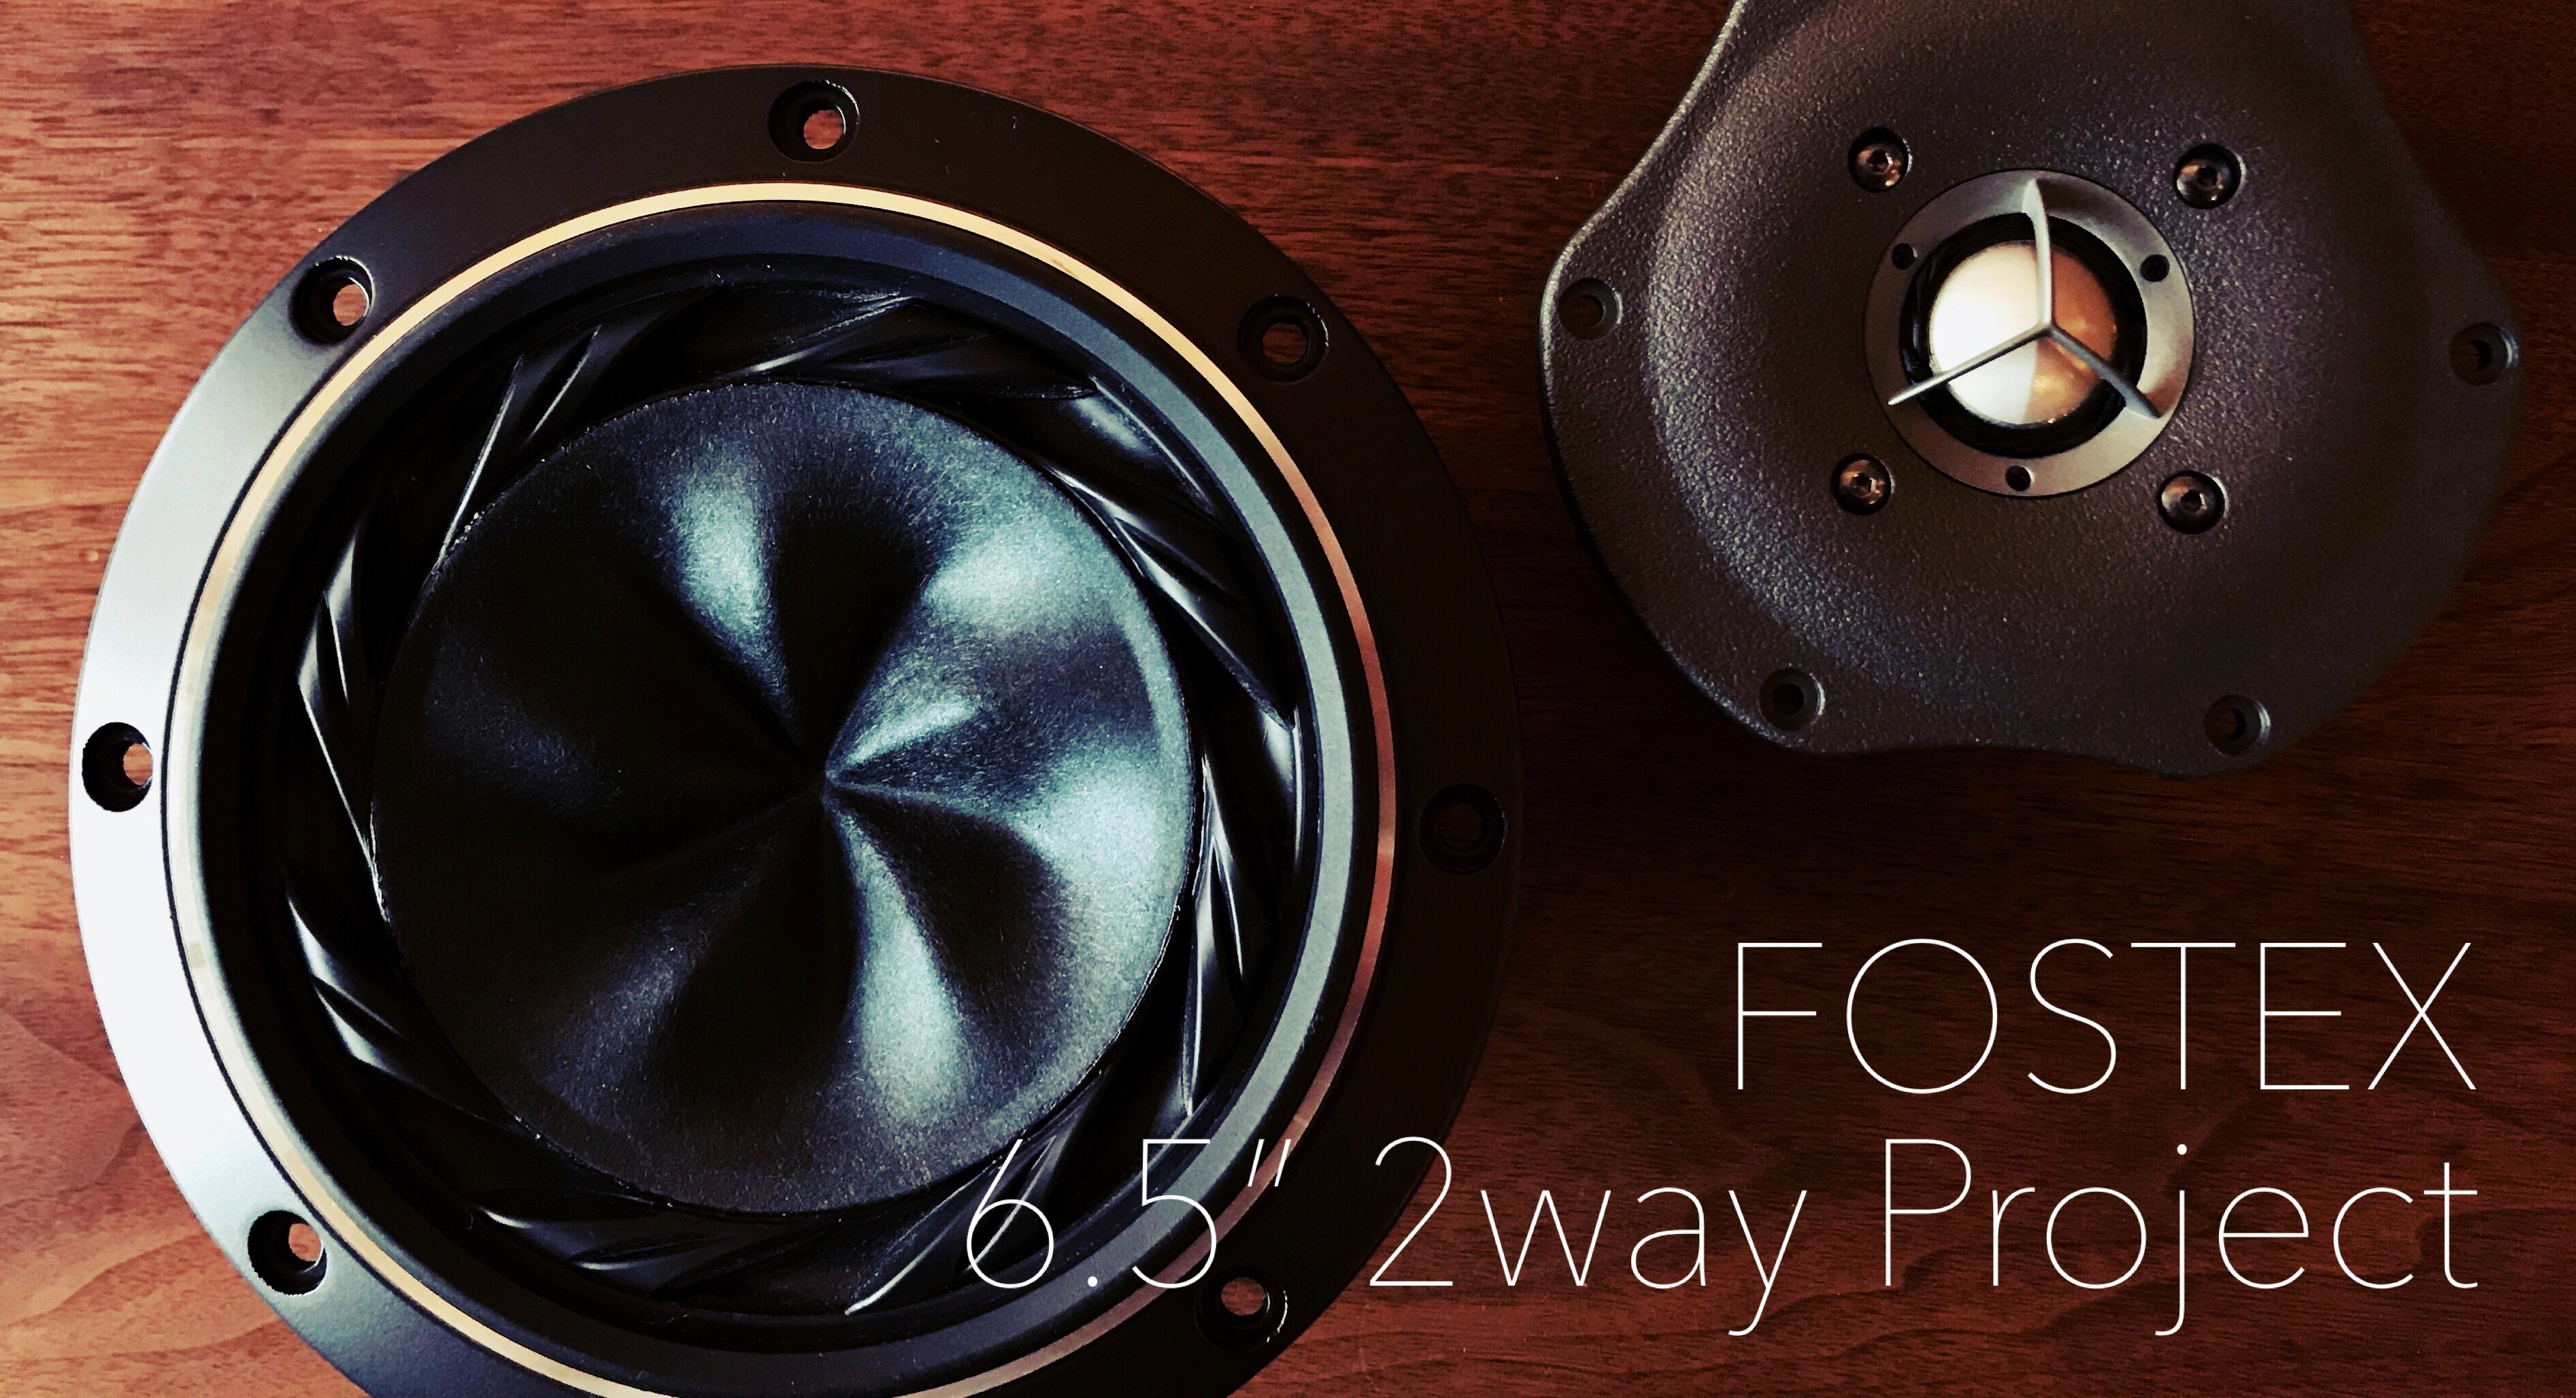 FOSTEX 6.5″ 2way Project Phase 1 (Project Launch)